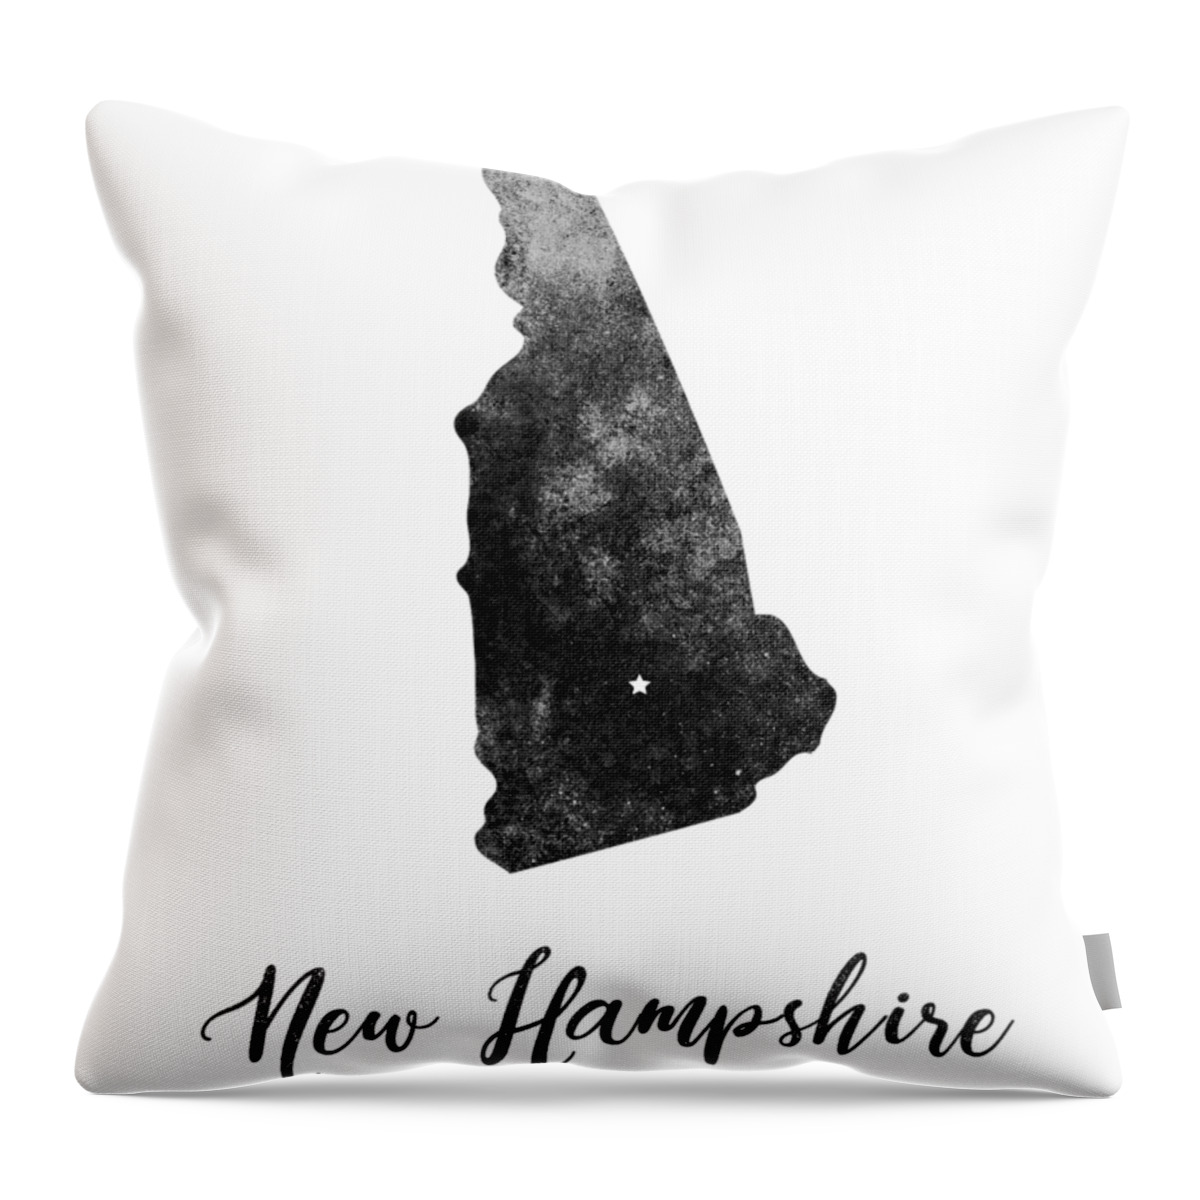 New Hampshire Throw Pillow featuring the mixed media New Hampshire State Map Art - Grunge Silhouette by Studio Grafiikka